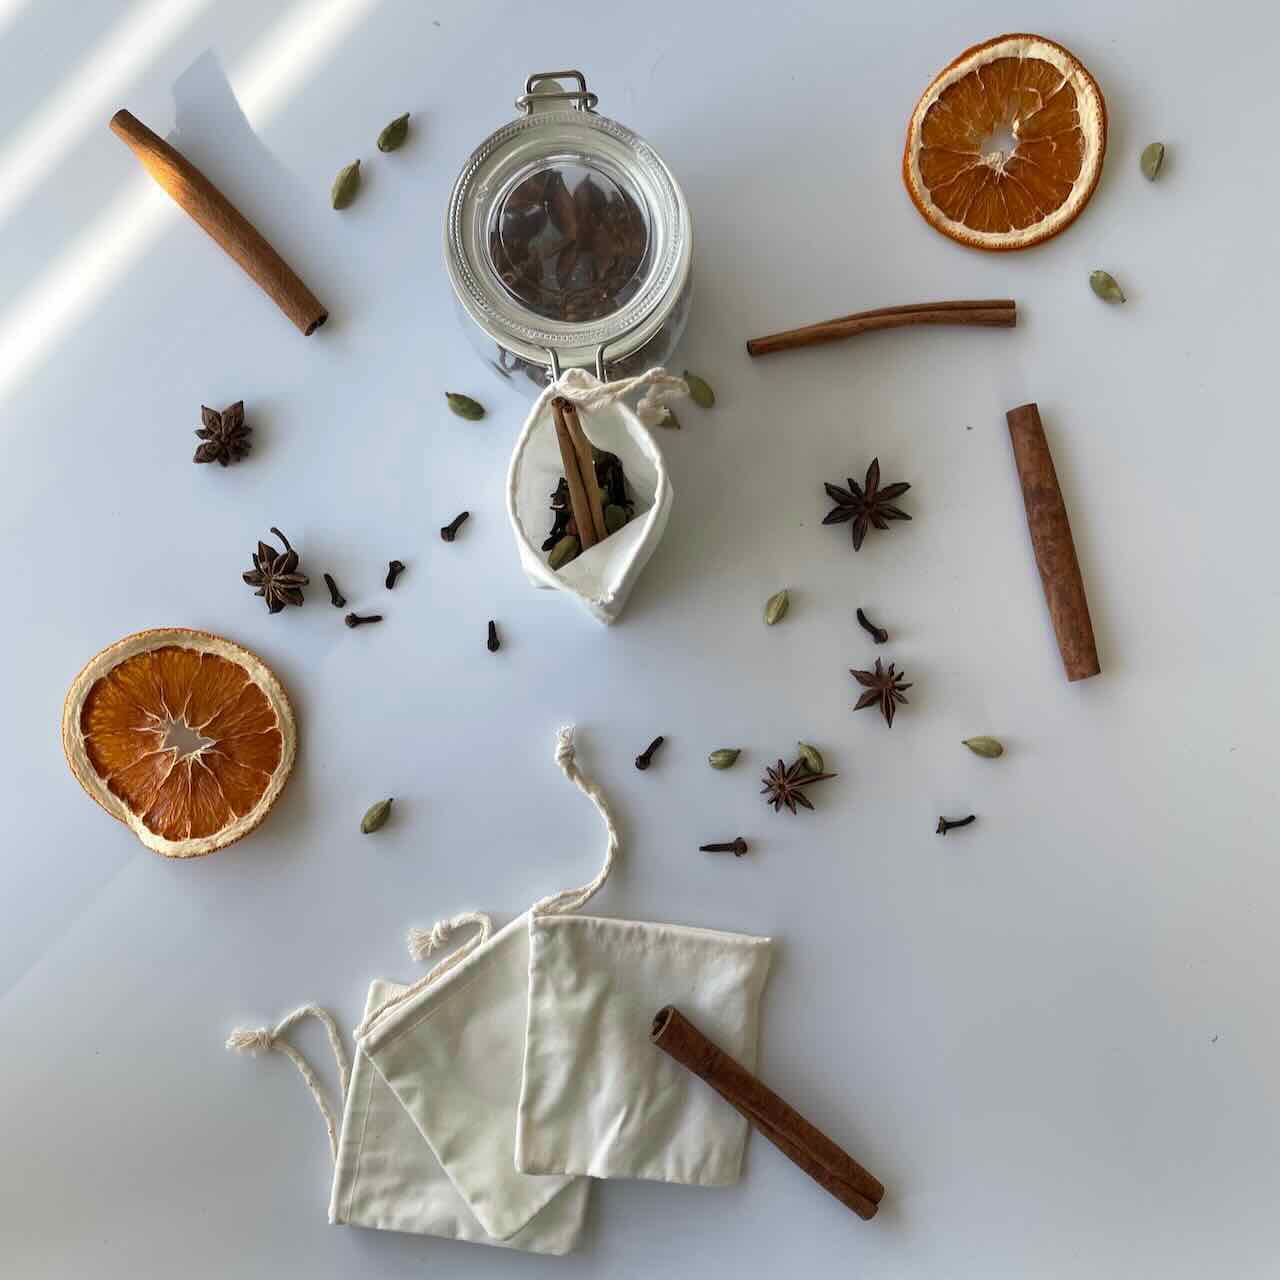 reusable muslin tea bags lay on top of a white table with spices and dried orange slices scattered around them